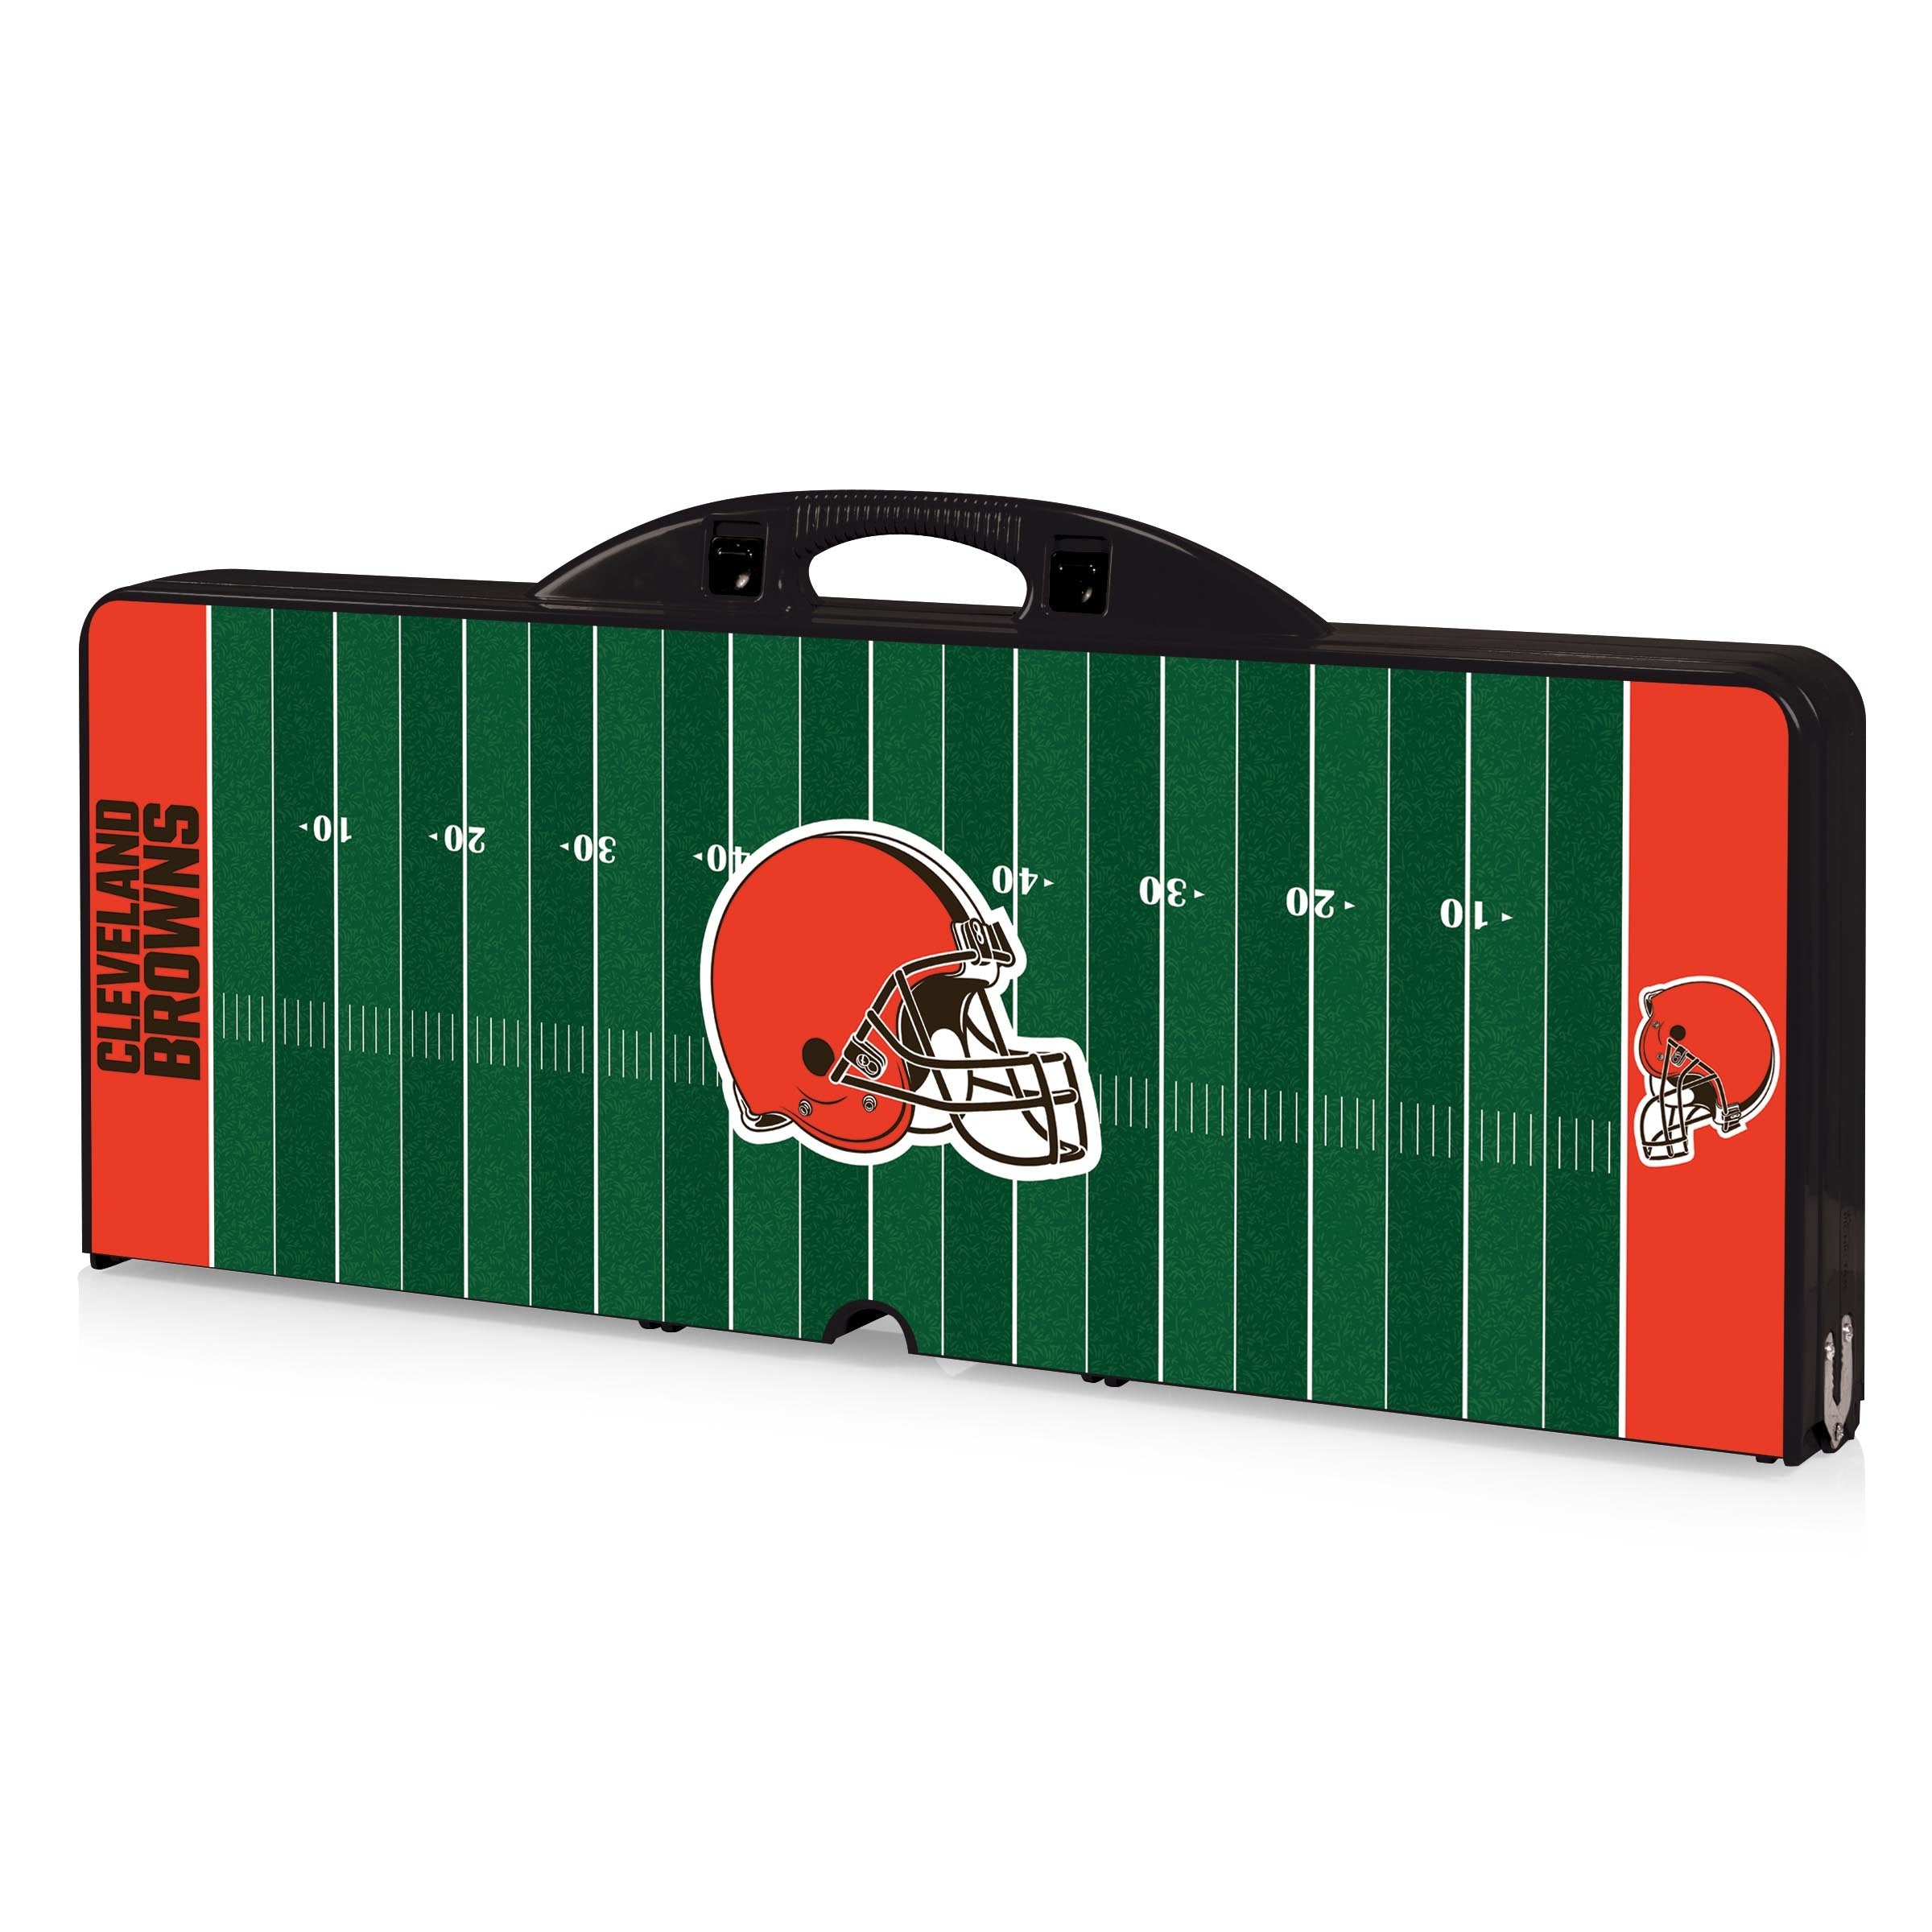 Football Field - Cleveland Browns - Picnic Table Portable Folding Table with Seats